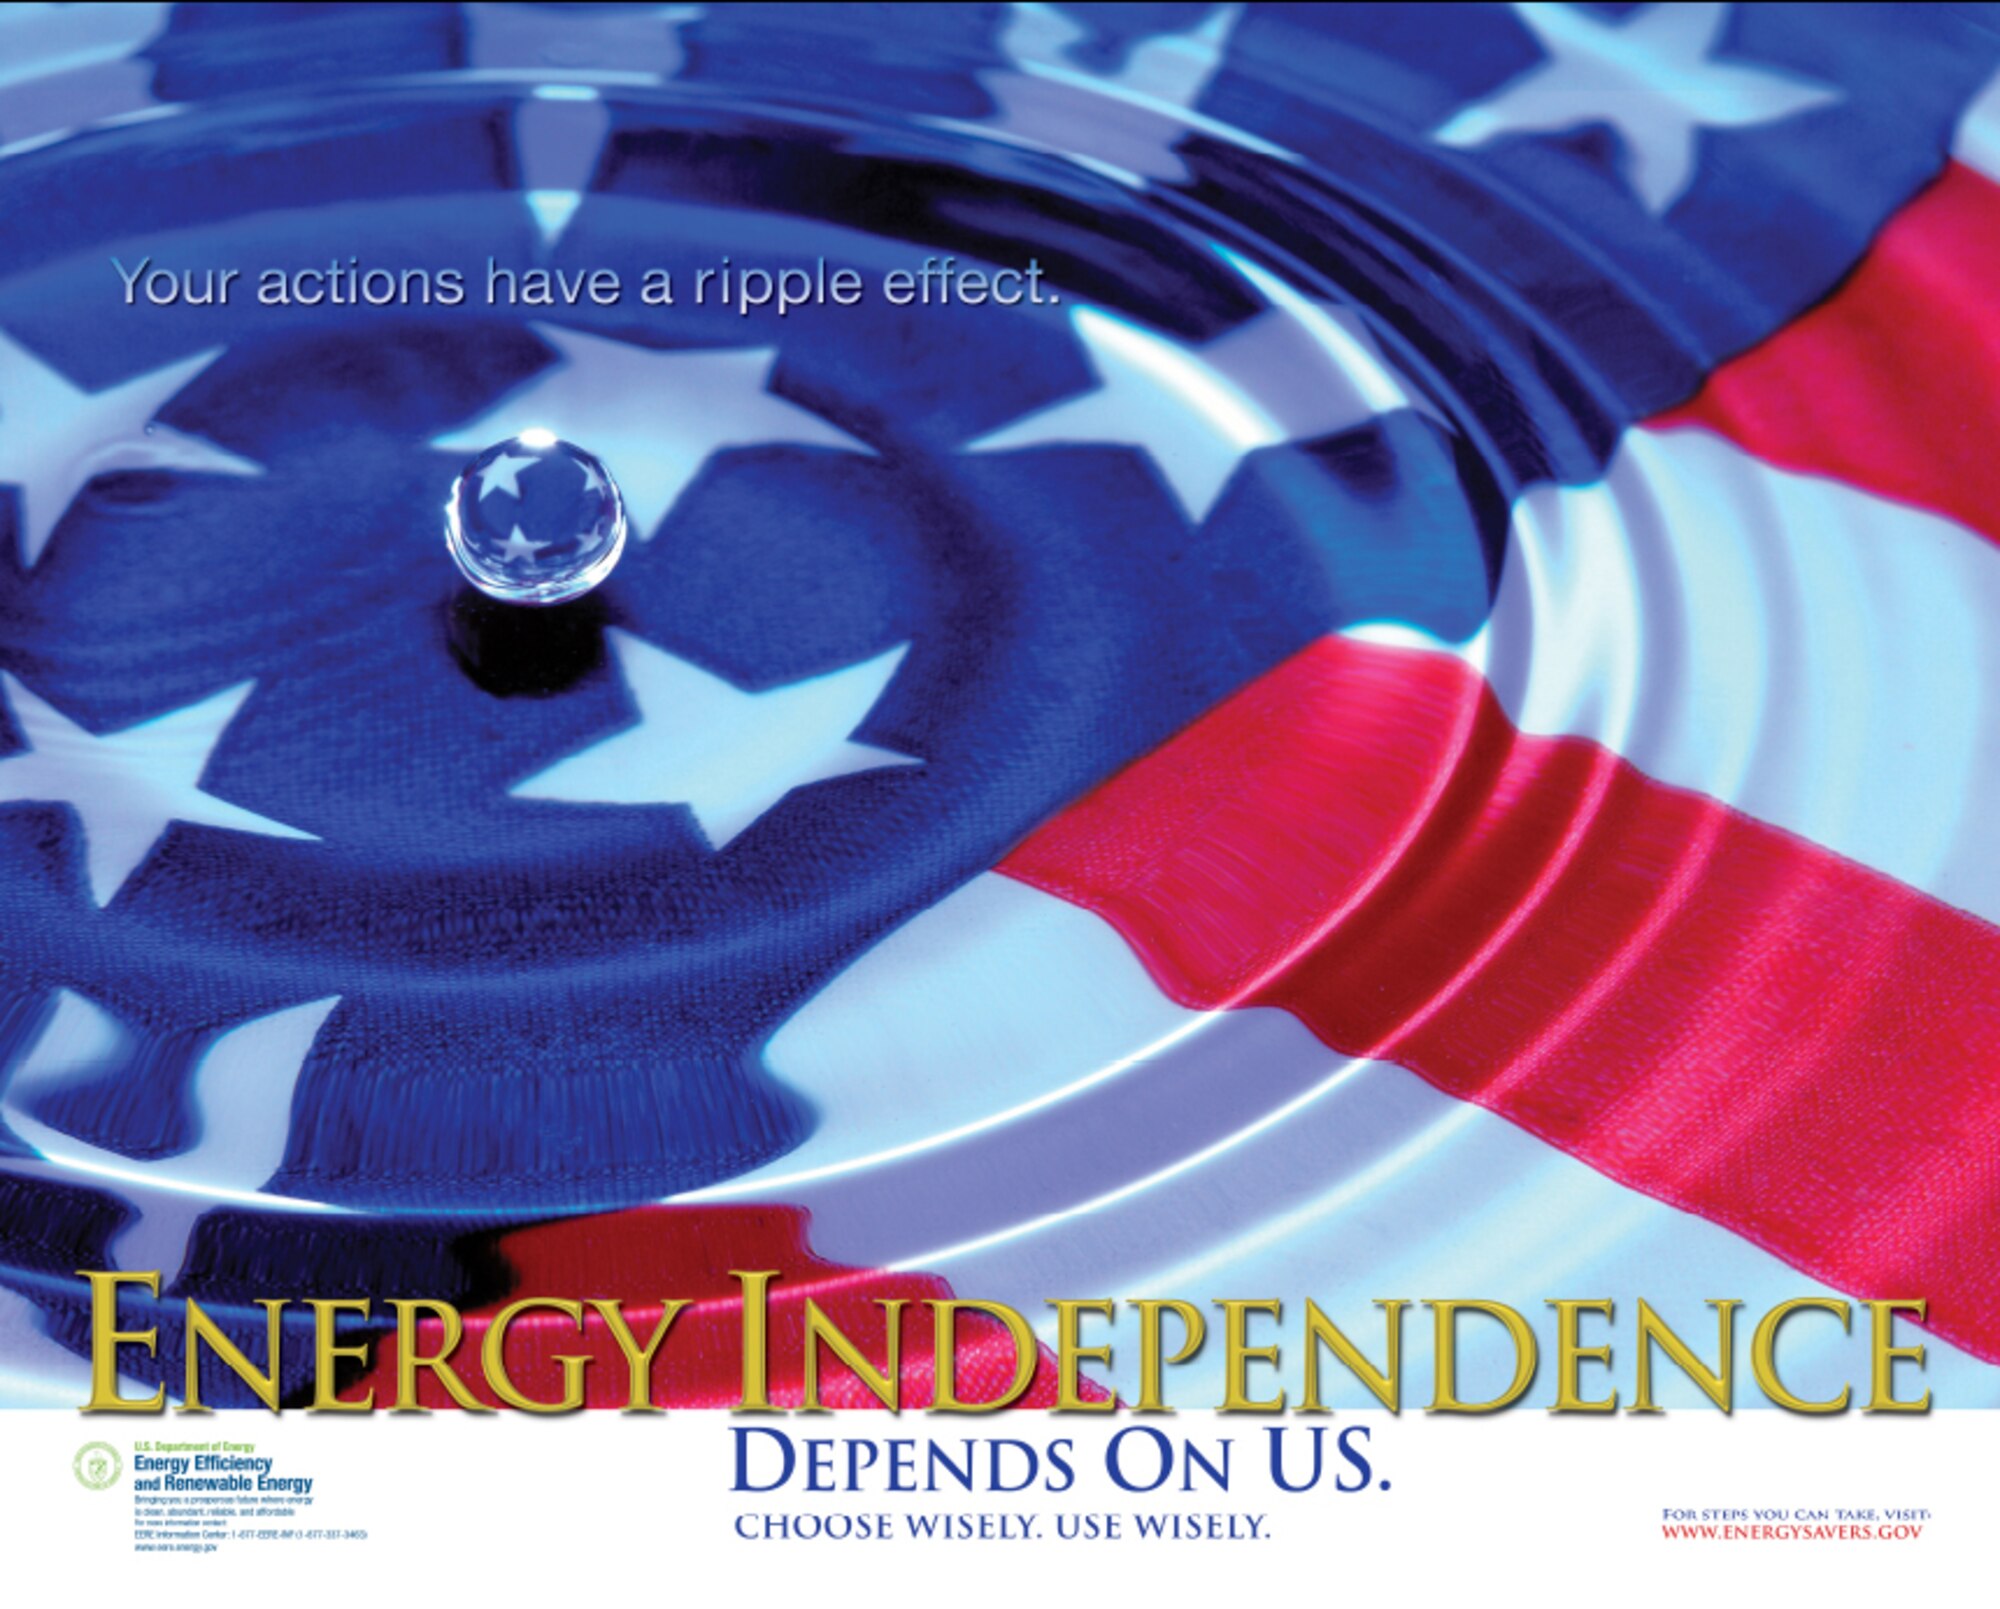 Patriotism in Smart Energy Choices